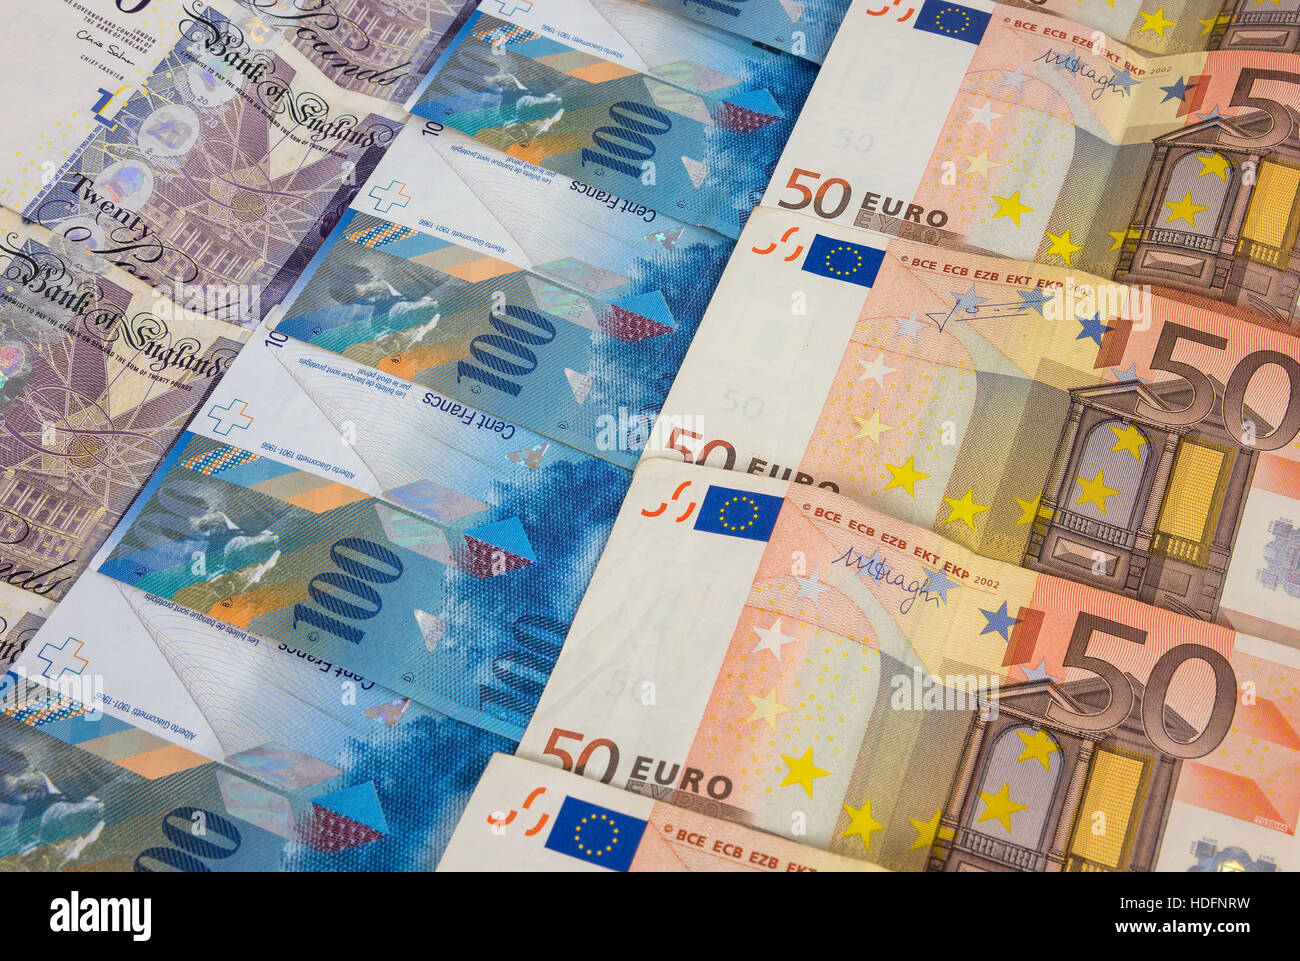 GBP EURO and CHF banknotes laying in a rows Stock Photo - Alamy